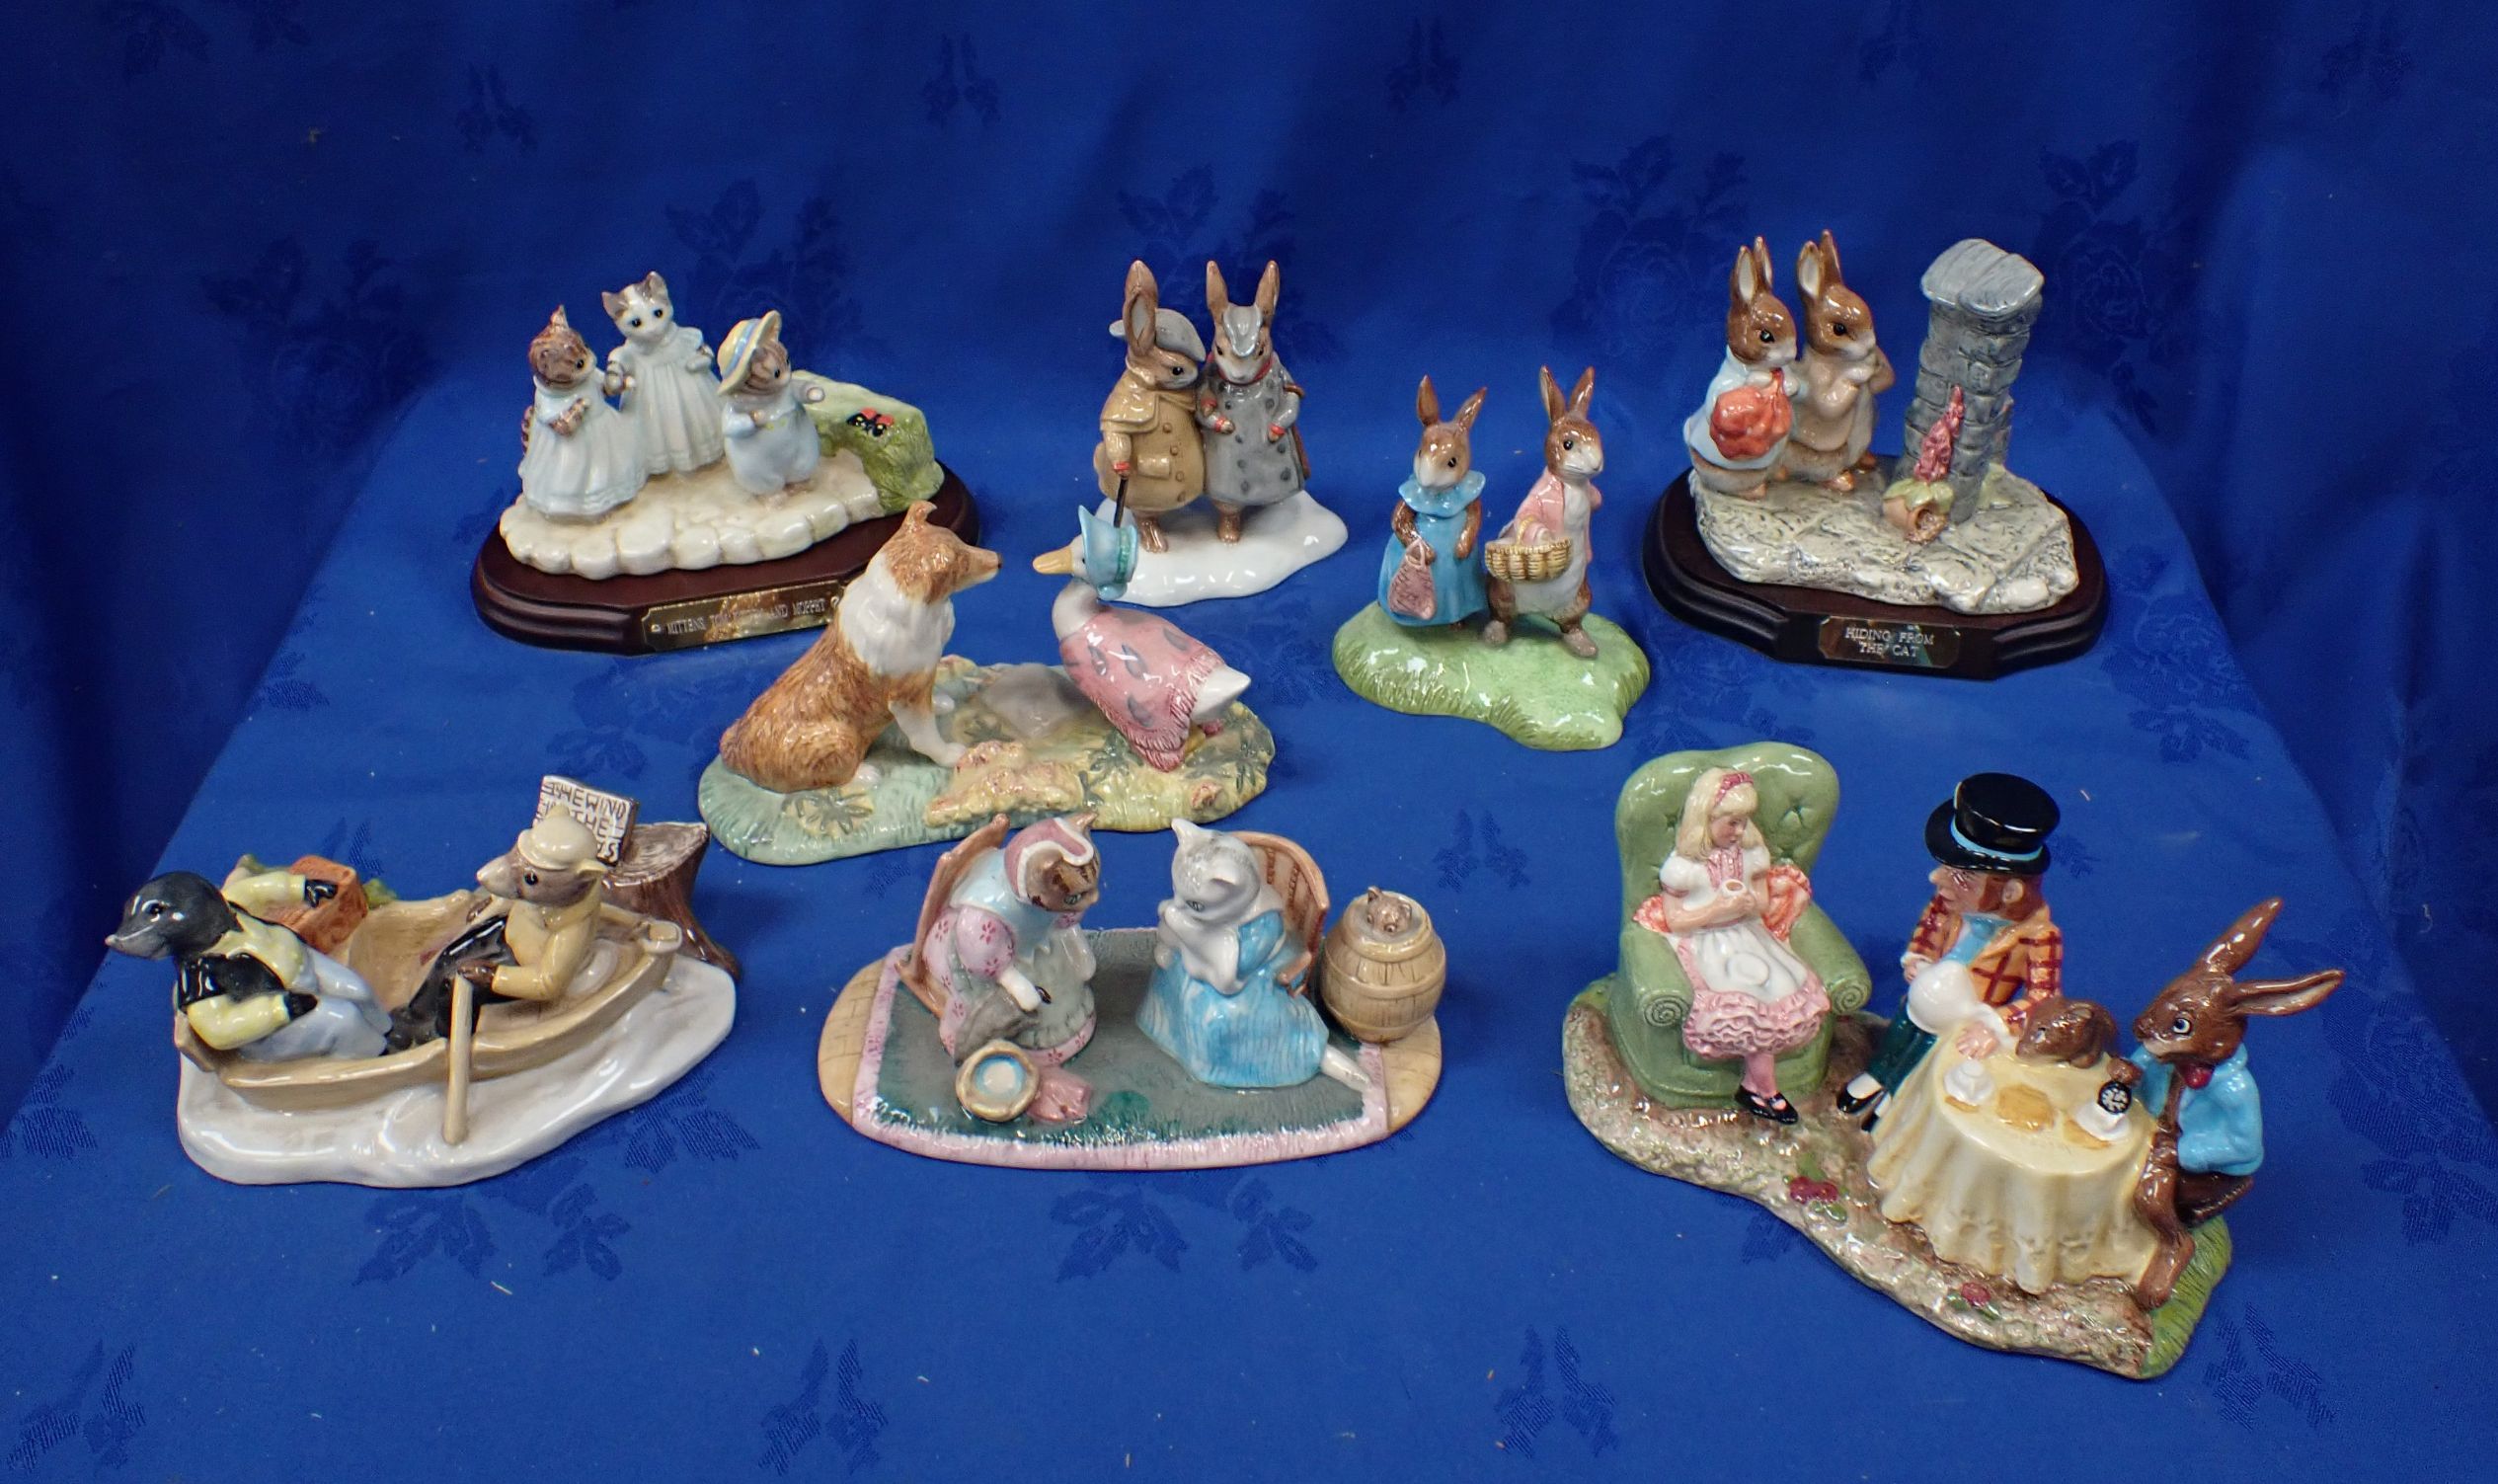 A COLLECTION OF ROYAL DOULTON AND BESWICK BEATRIX POTTER FIGURINES